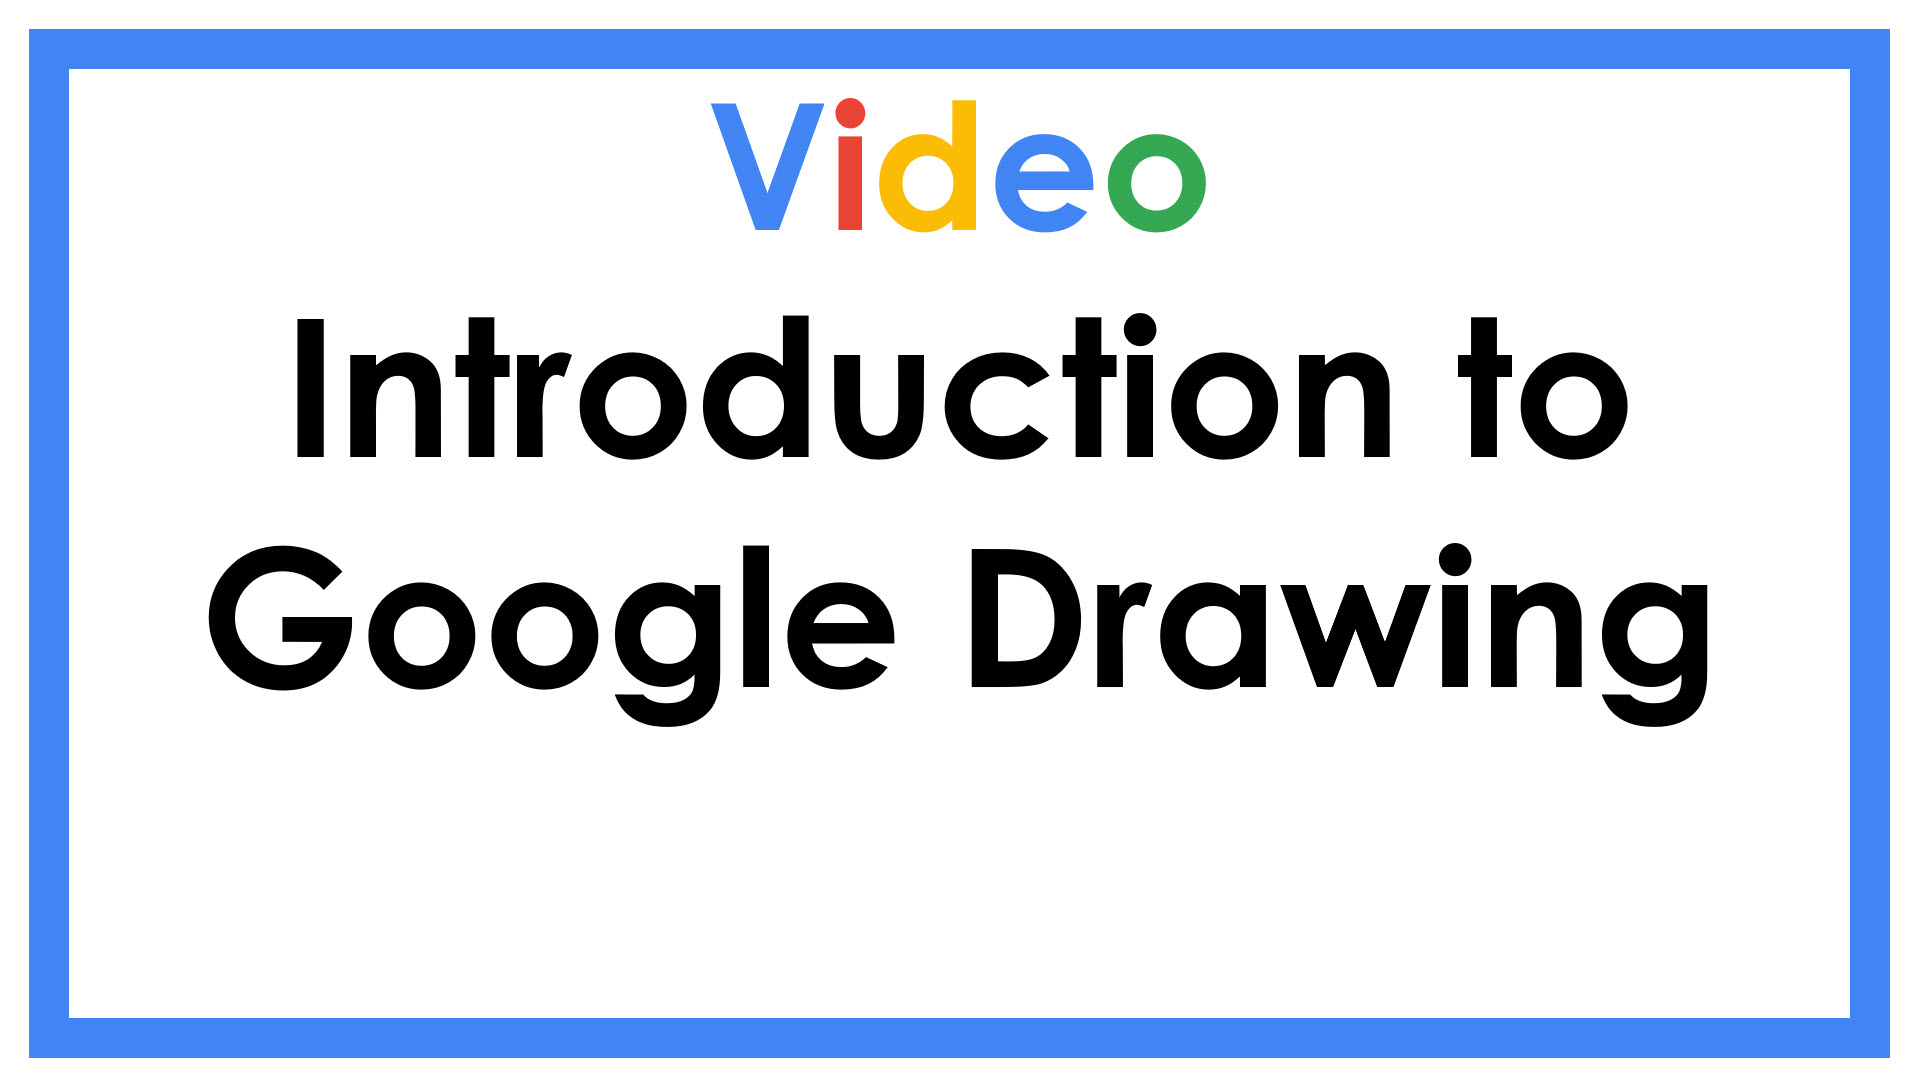 Video Introduction to Google Drawing